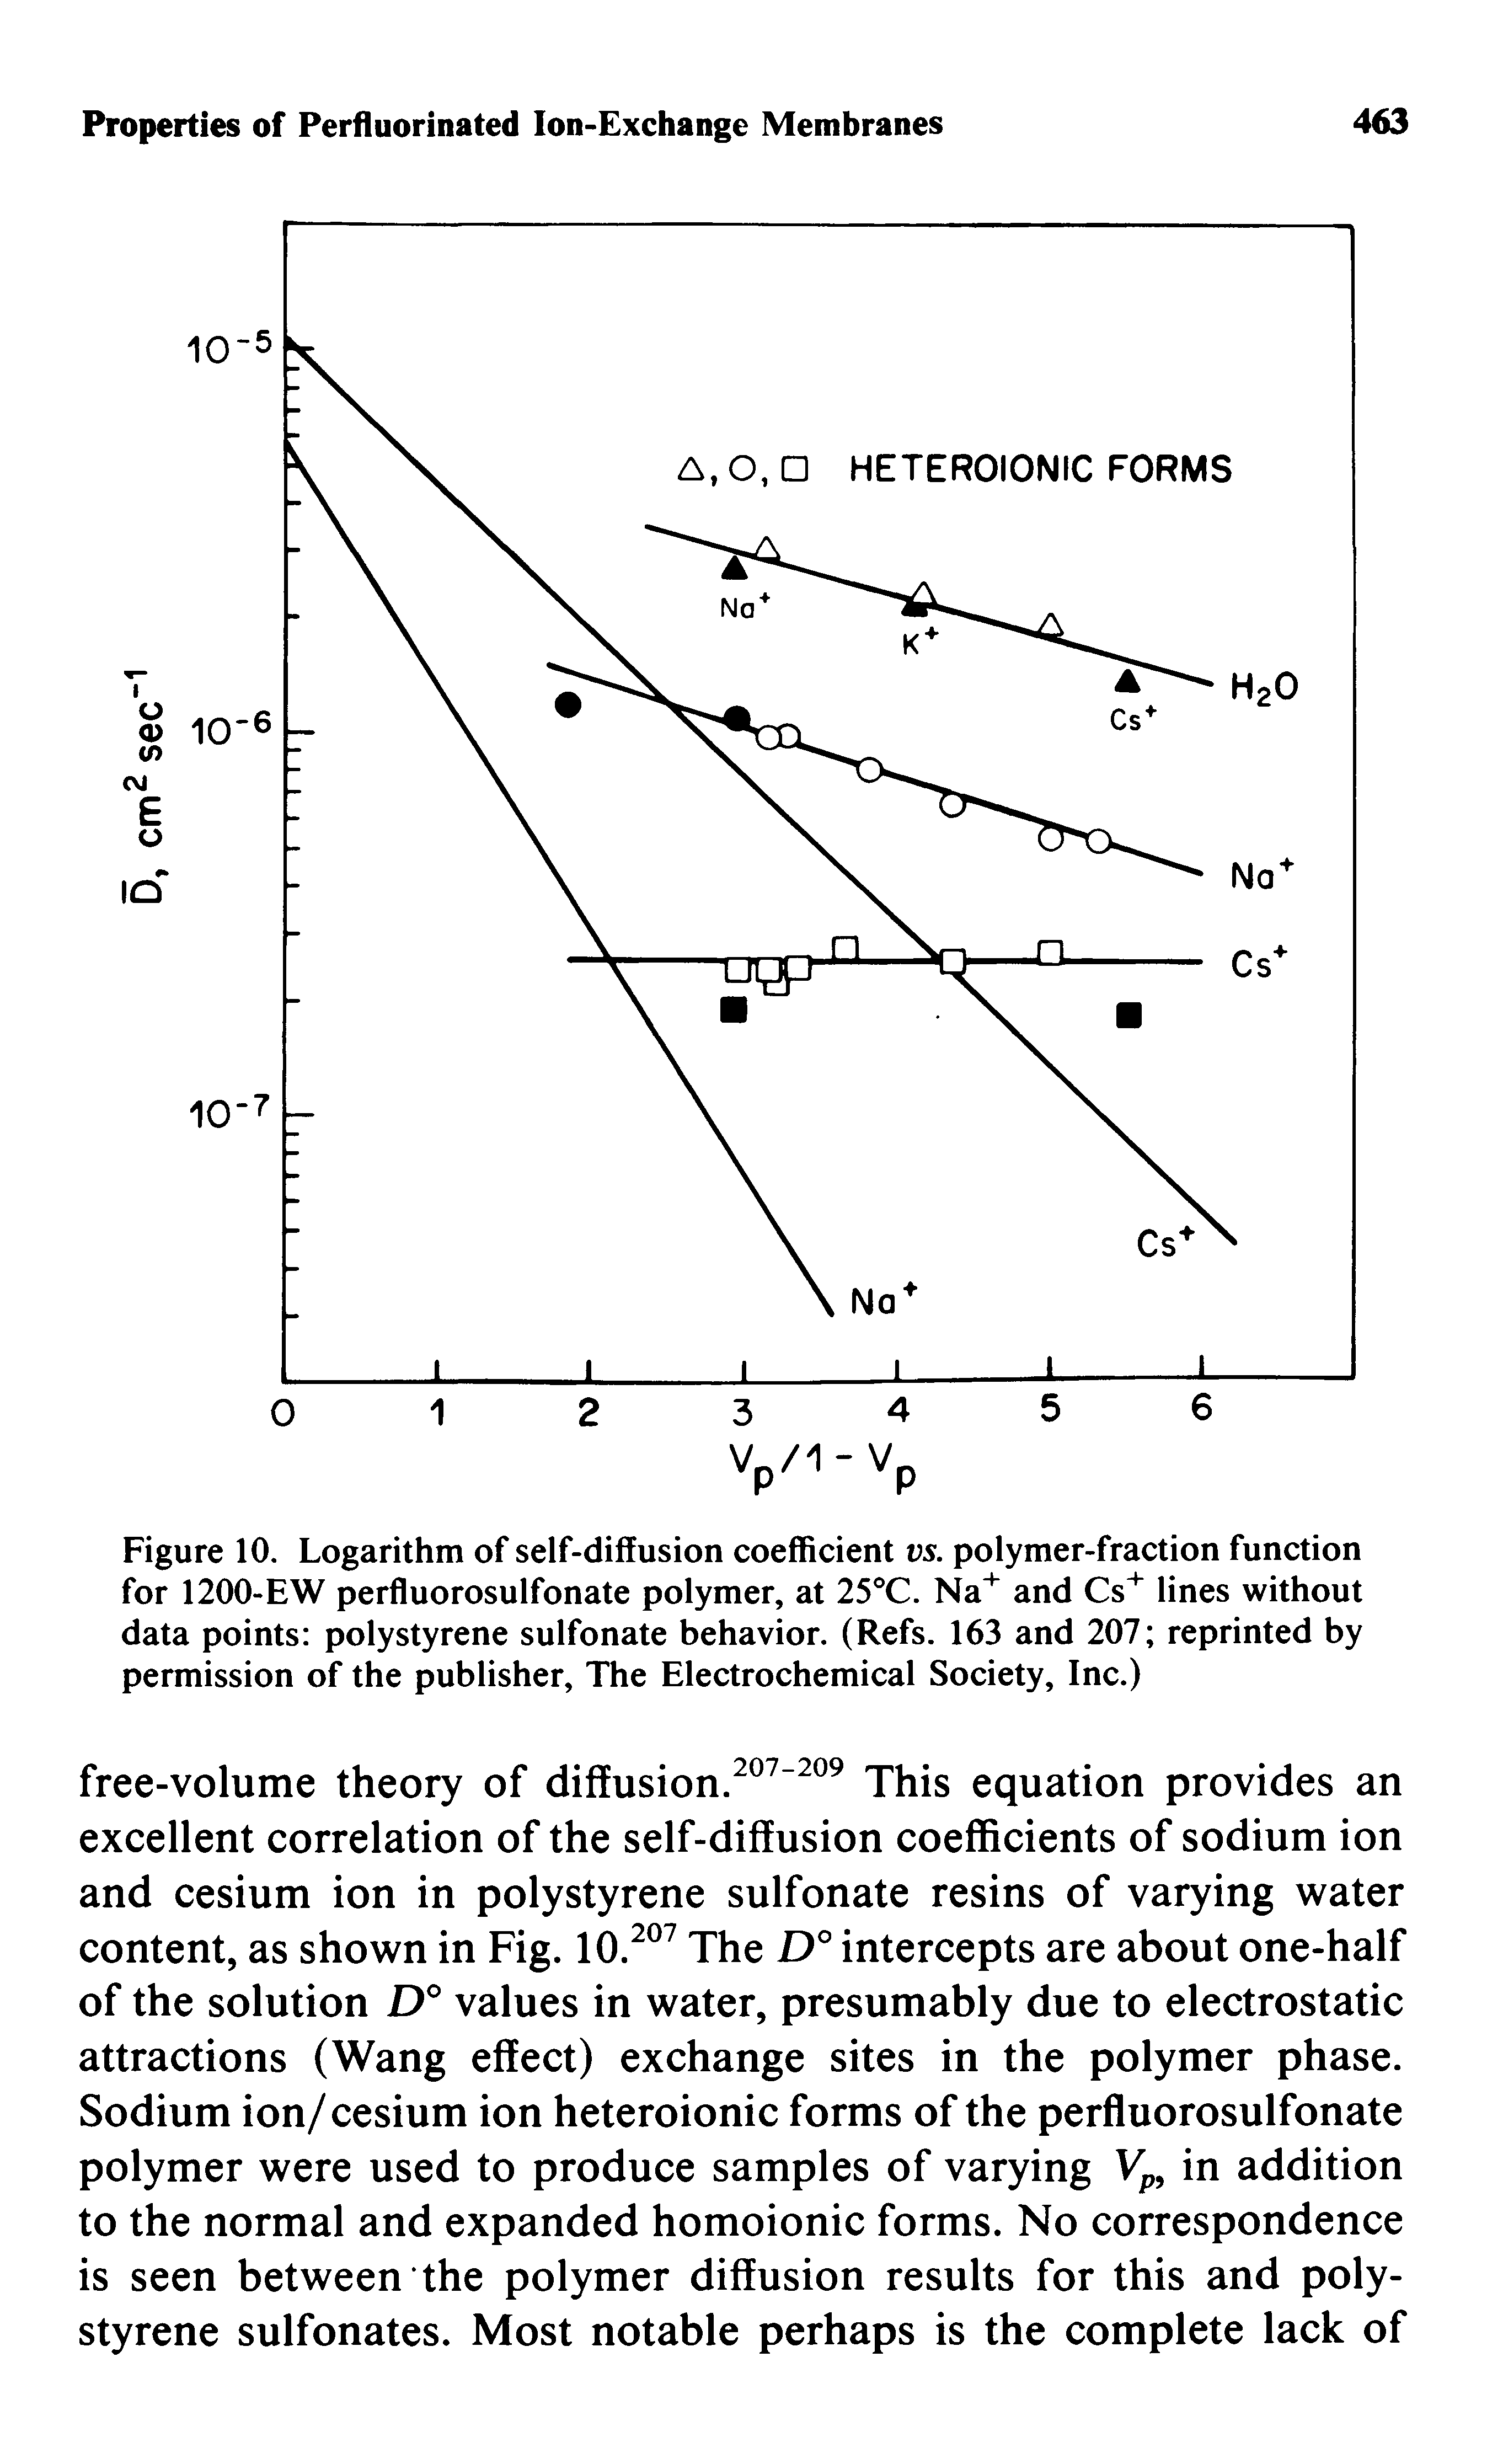 Figure 10. Logarithm of self-diffusion coefficient vs. polymer-fraction function for 1200-EW perfluorosulfonate polymer, at 25°C. Na and Cs" lines without data points polystyrene sulfonate behavior. (Refs. 163 and 207 reprinted by permission of the publisher. The Electrochemical Society, Inc.)...